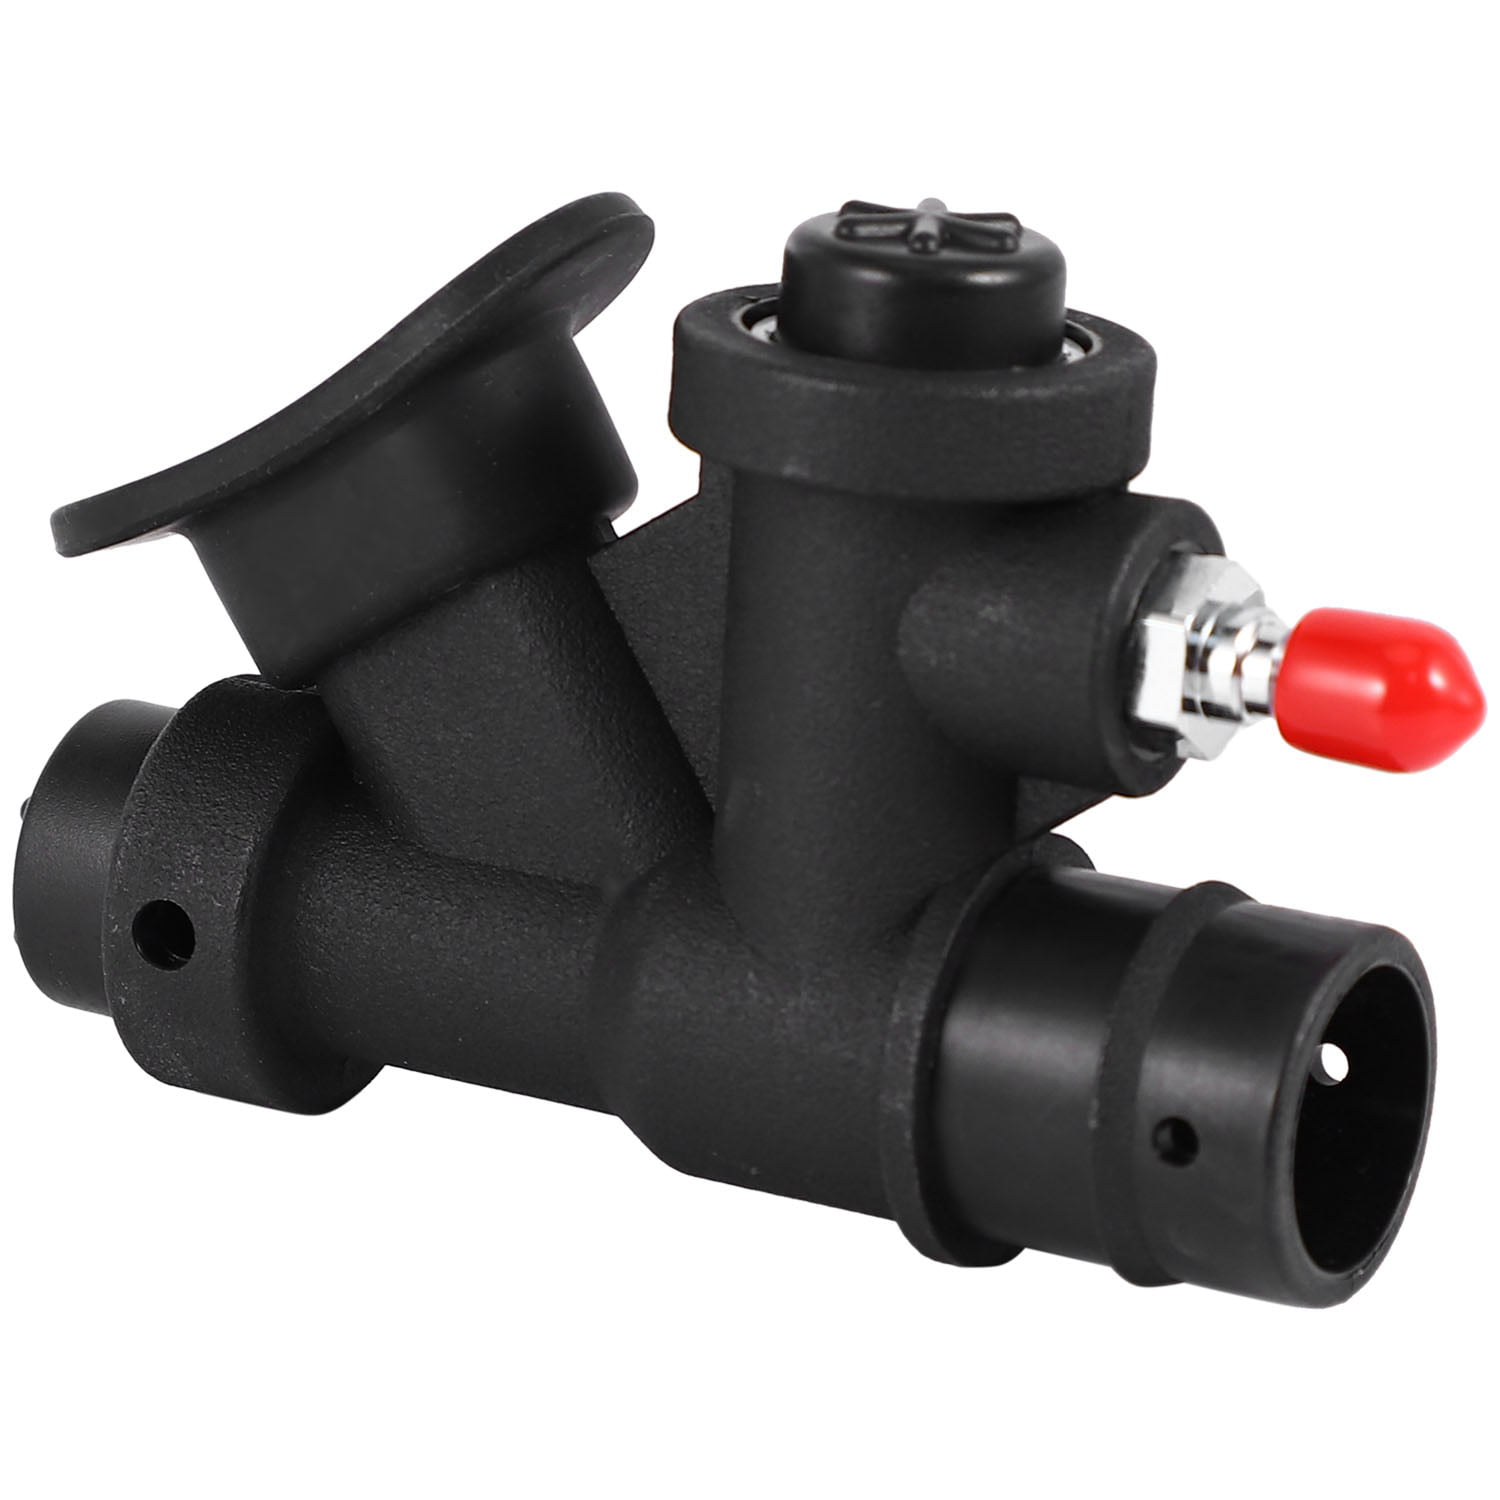 Reliable Scuba Diving Power Inflator   Fits for All Standard Flex Hose 